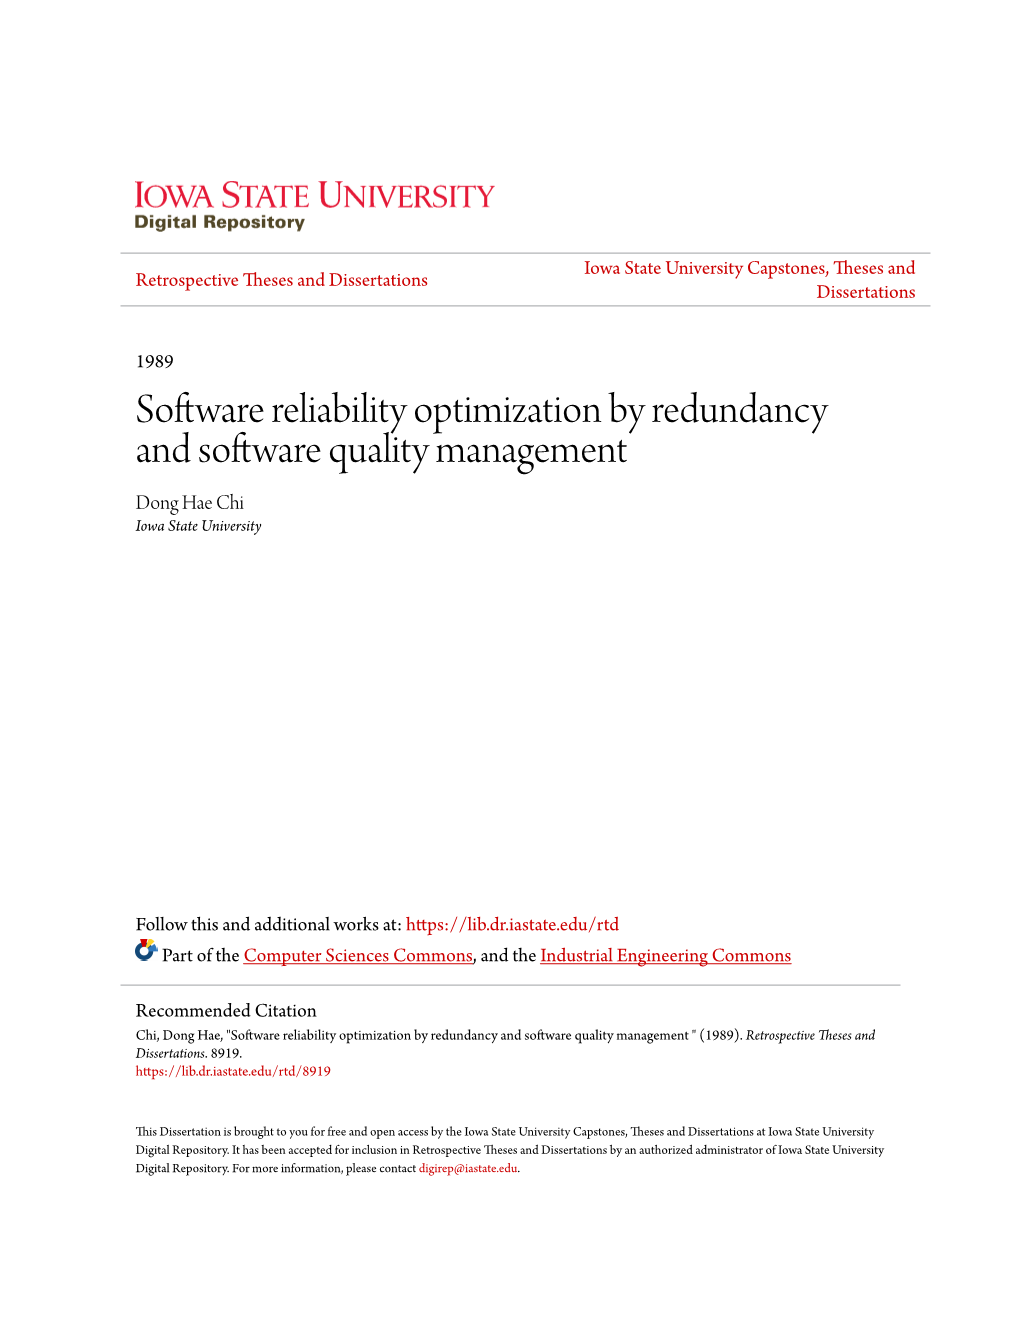 Software Reliability Optimization by Redundancy and Software Quality Management Dong Hae Chi Iowa State University